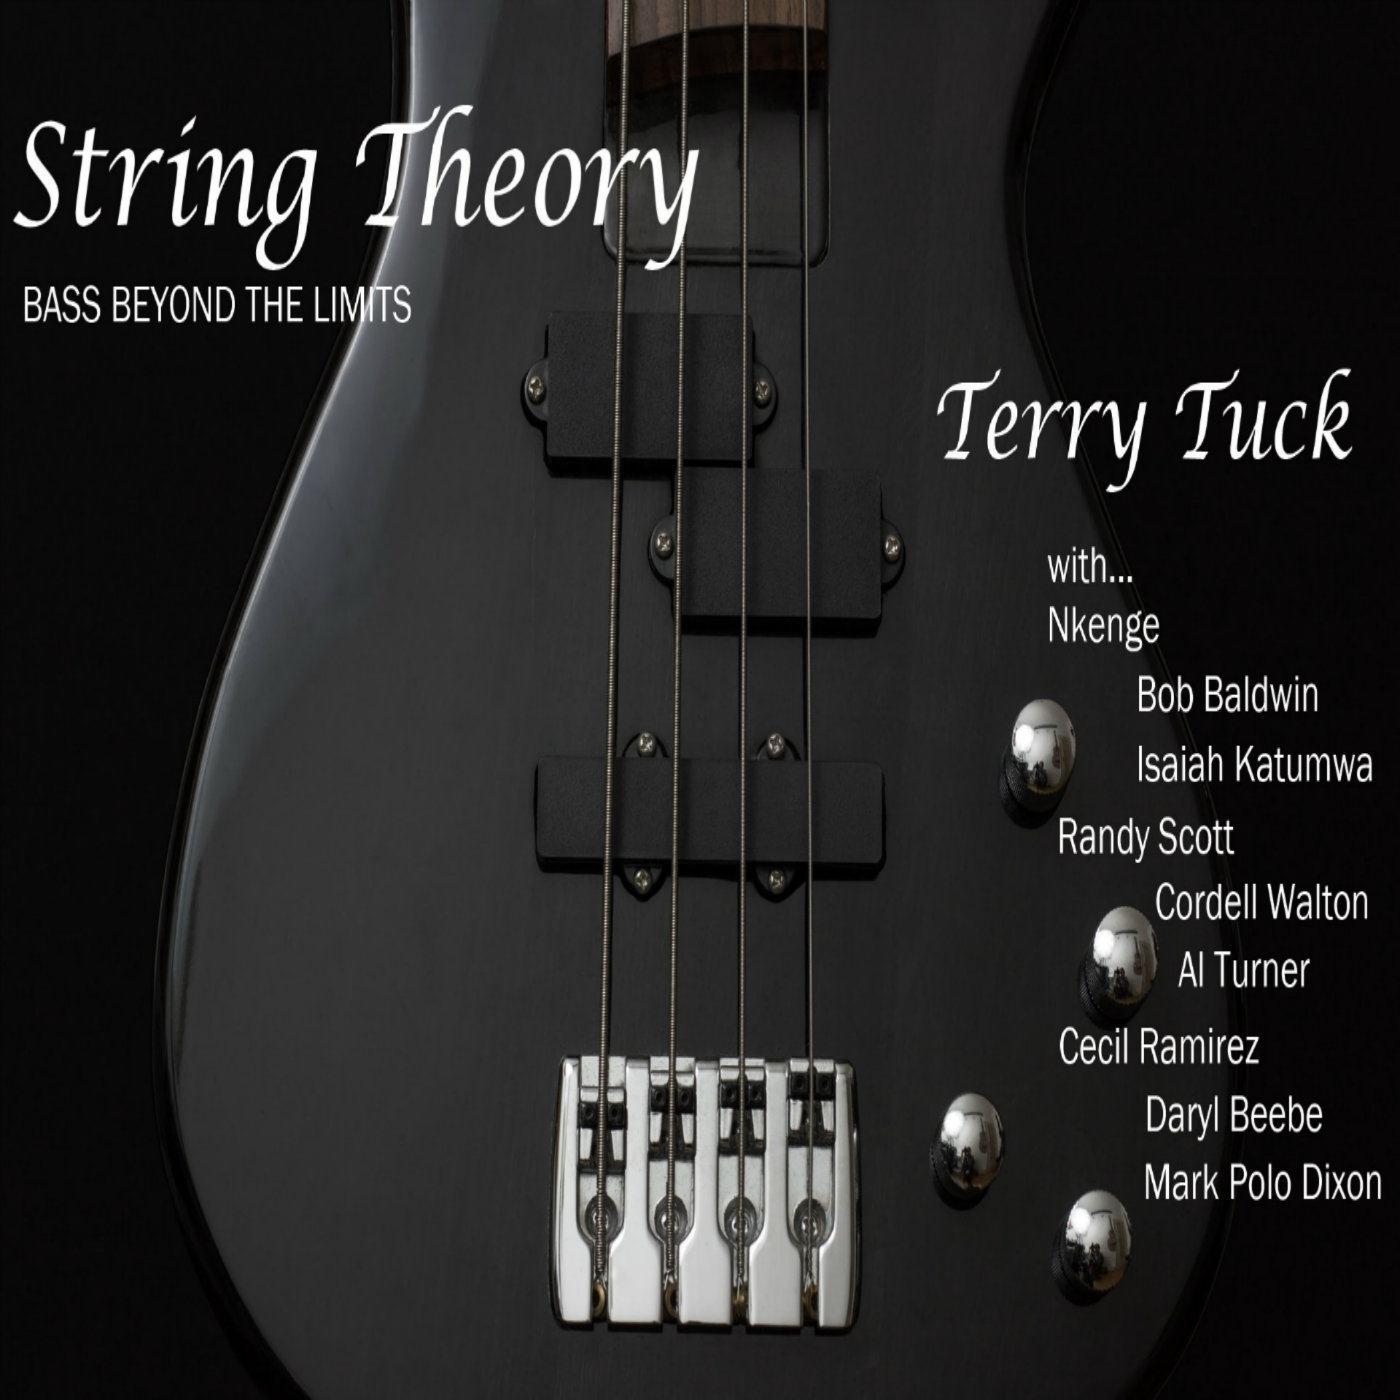 String Theory (Bass Beyond the Limits)